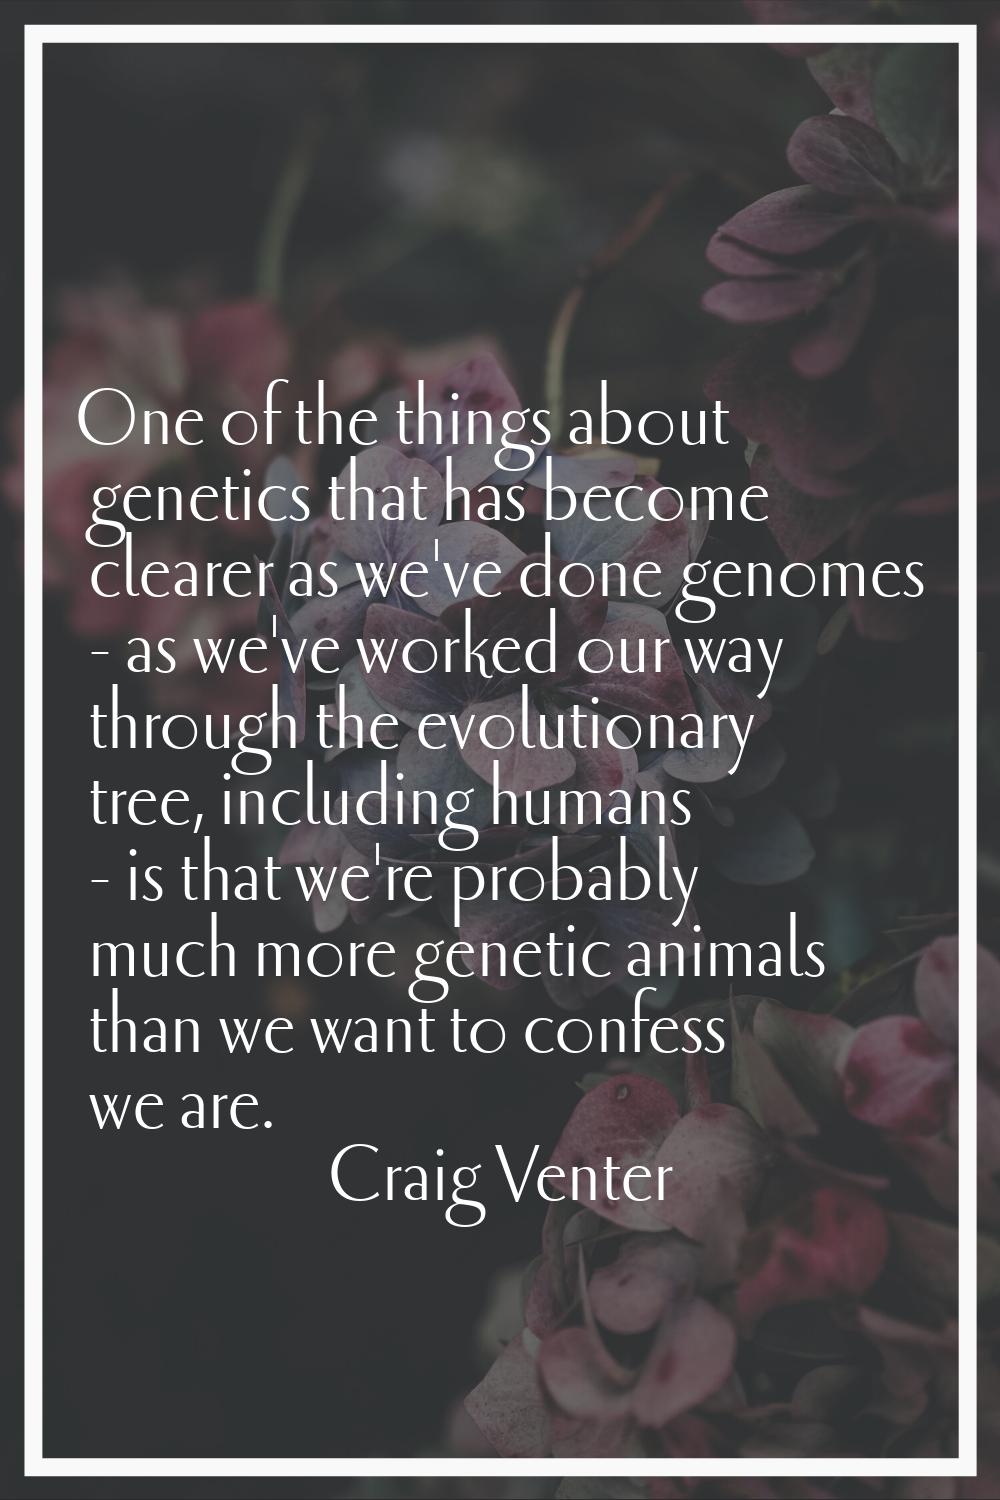 One of the things about genetics that has become clearer as we've done genomes - as we've worked ou